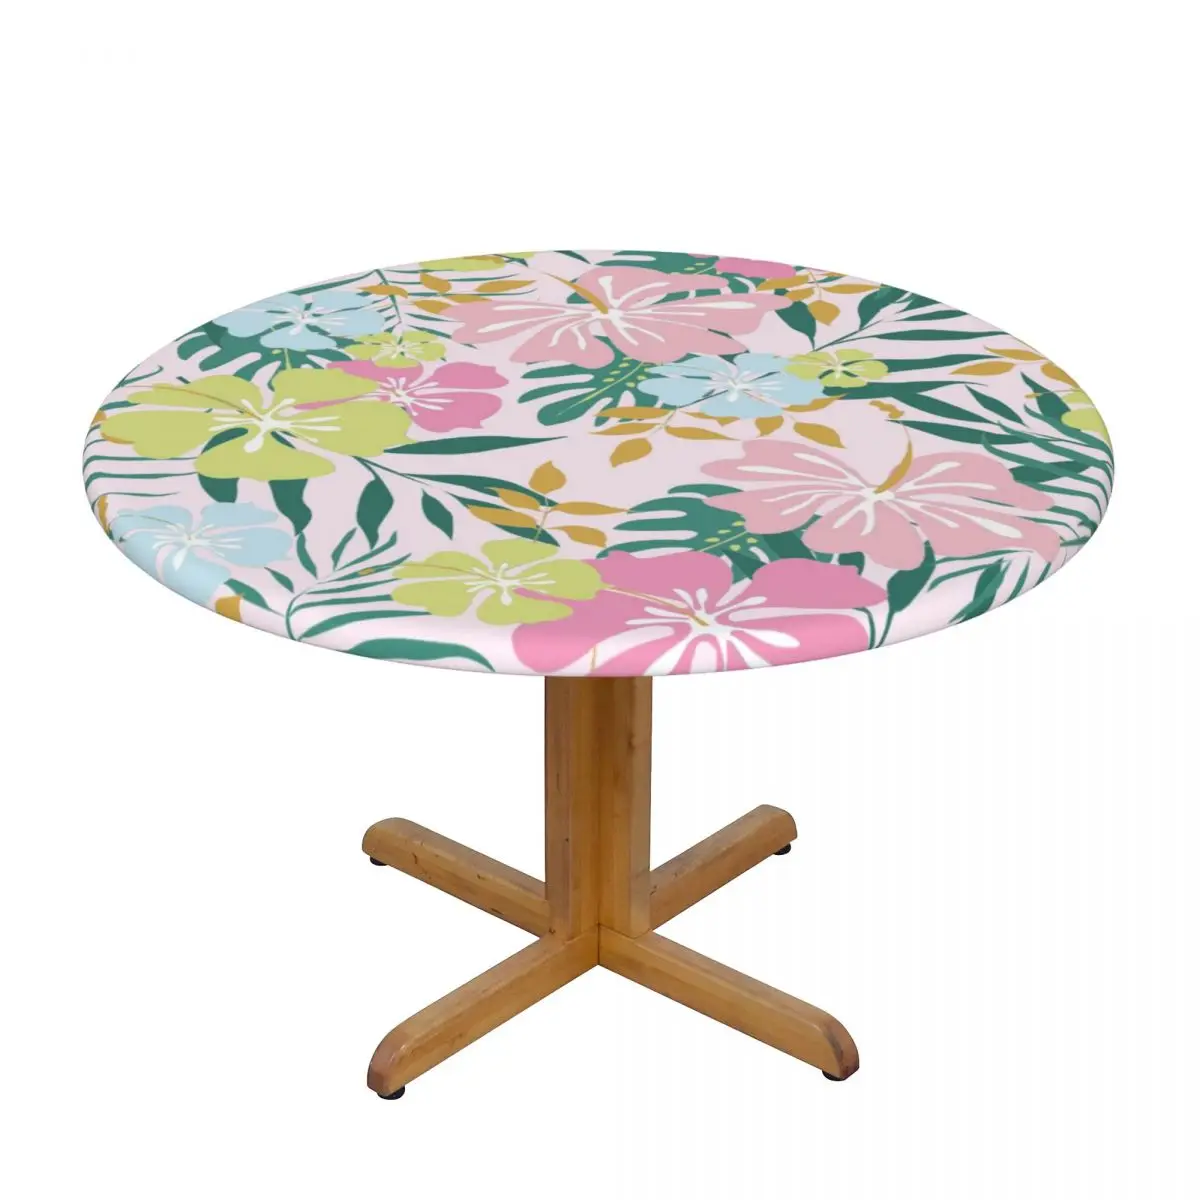 

Hawaiian Flowers And Palms Leafes Waterproof Polyester Round Tablecloth Catering Fitted Table Cover with Elastic Edged